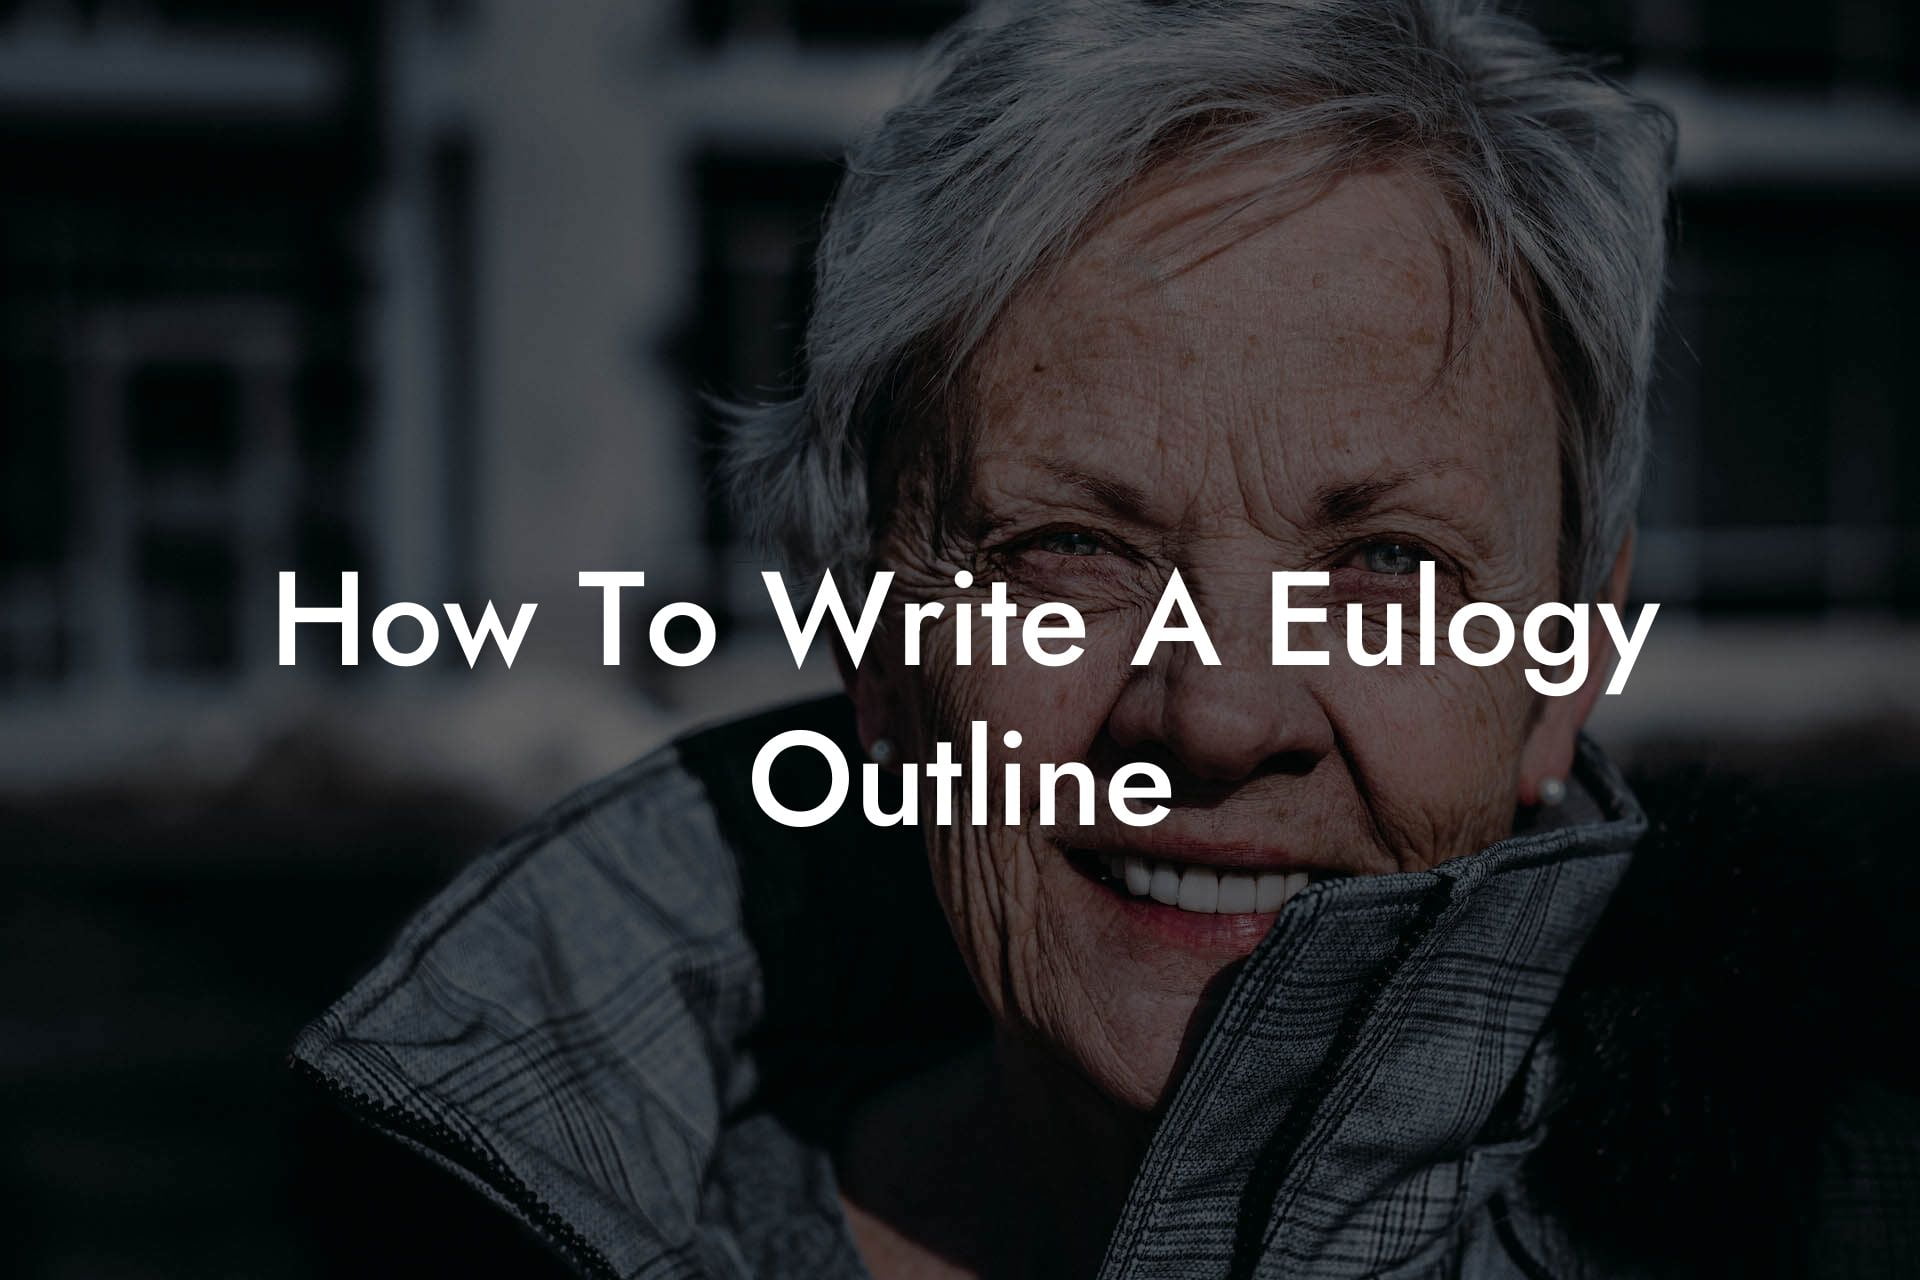 How To Write A Eulogy Outline